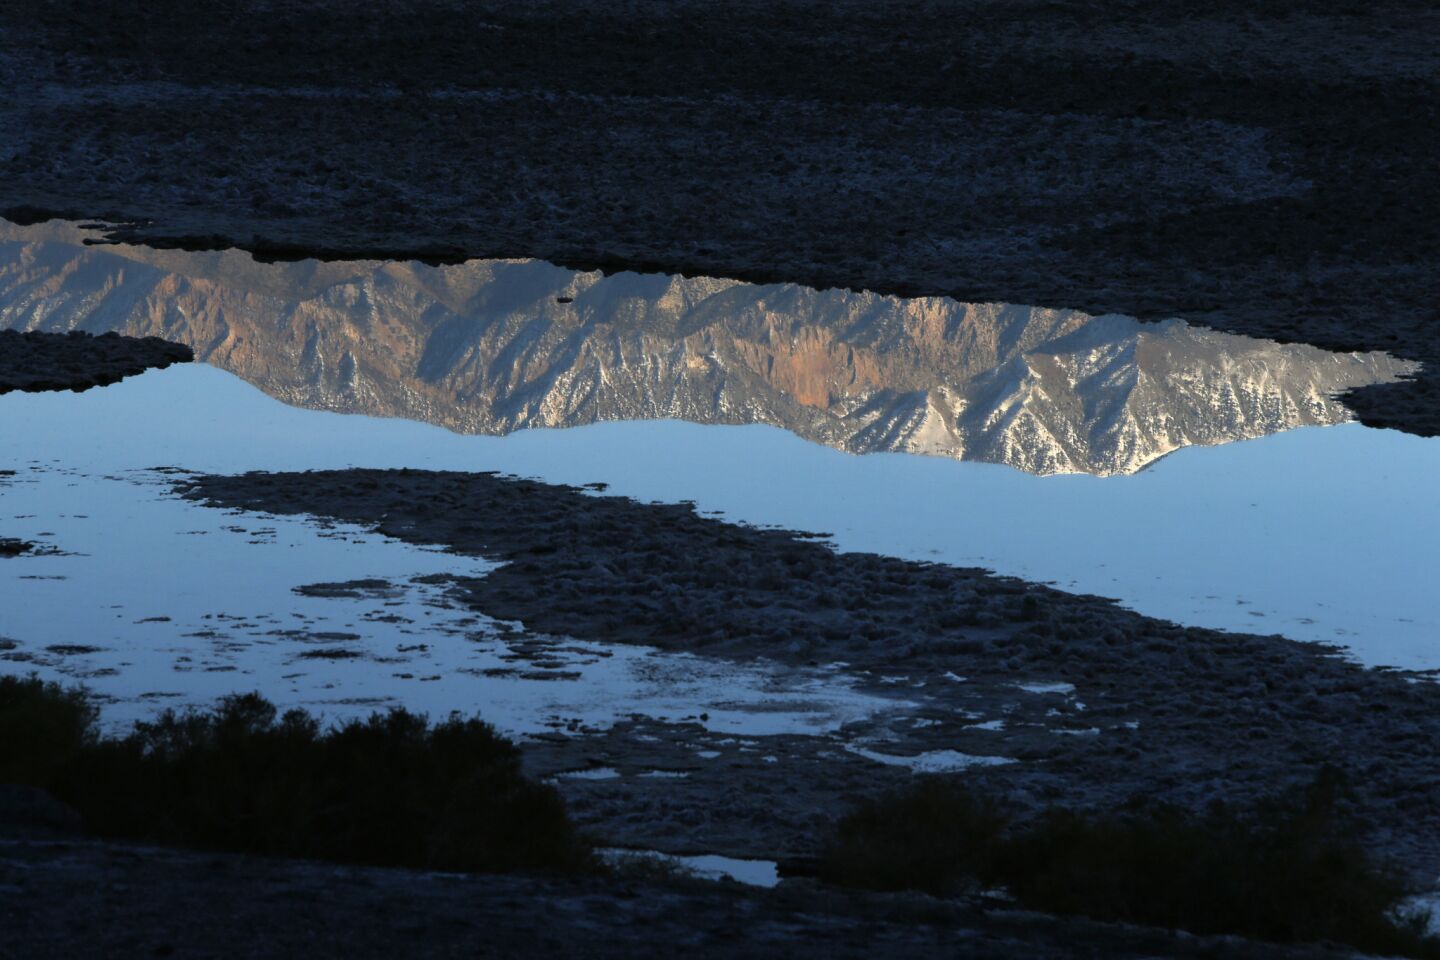 The highest spot in the park, Telescope Peak at 11,049 feet, is reflected in standing water in Death Valley's lowest place, Badwater Basin.